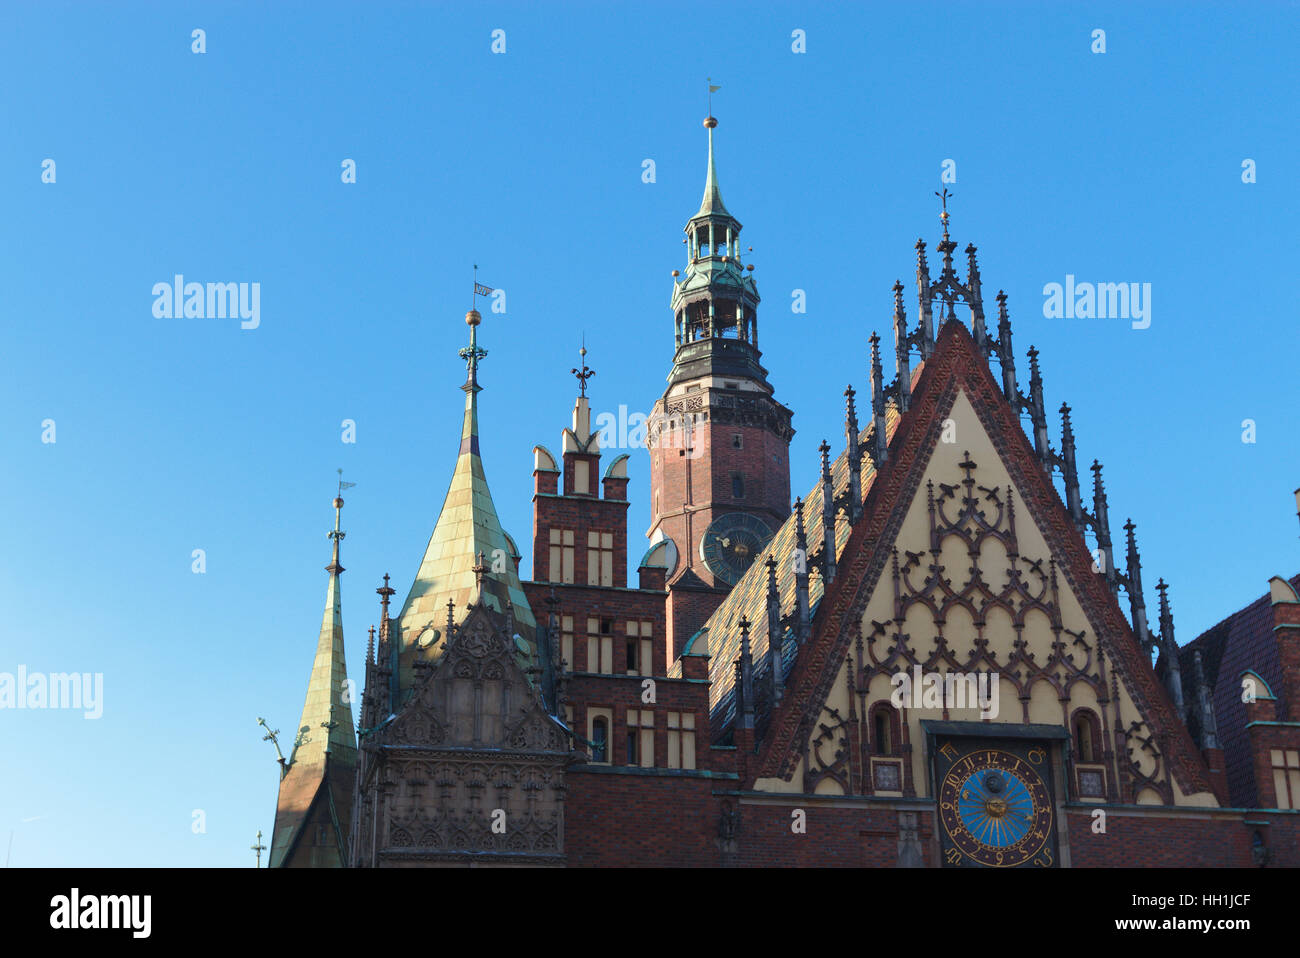 Tower and front with the clock of the old Gothic Town Hall in Wroclaw, Poland Stock Photo